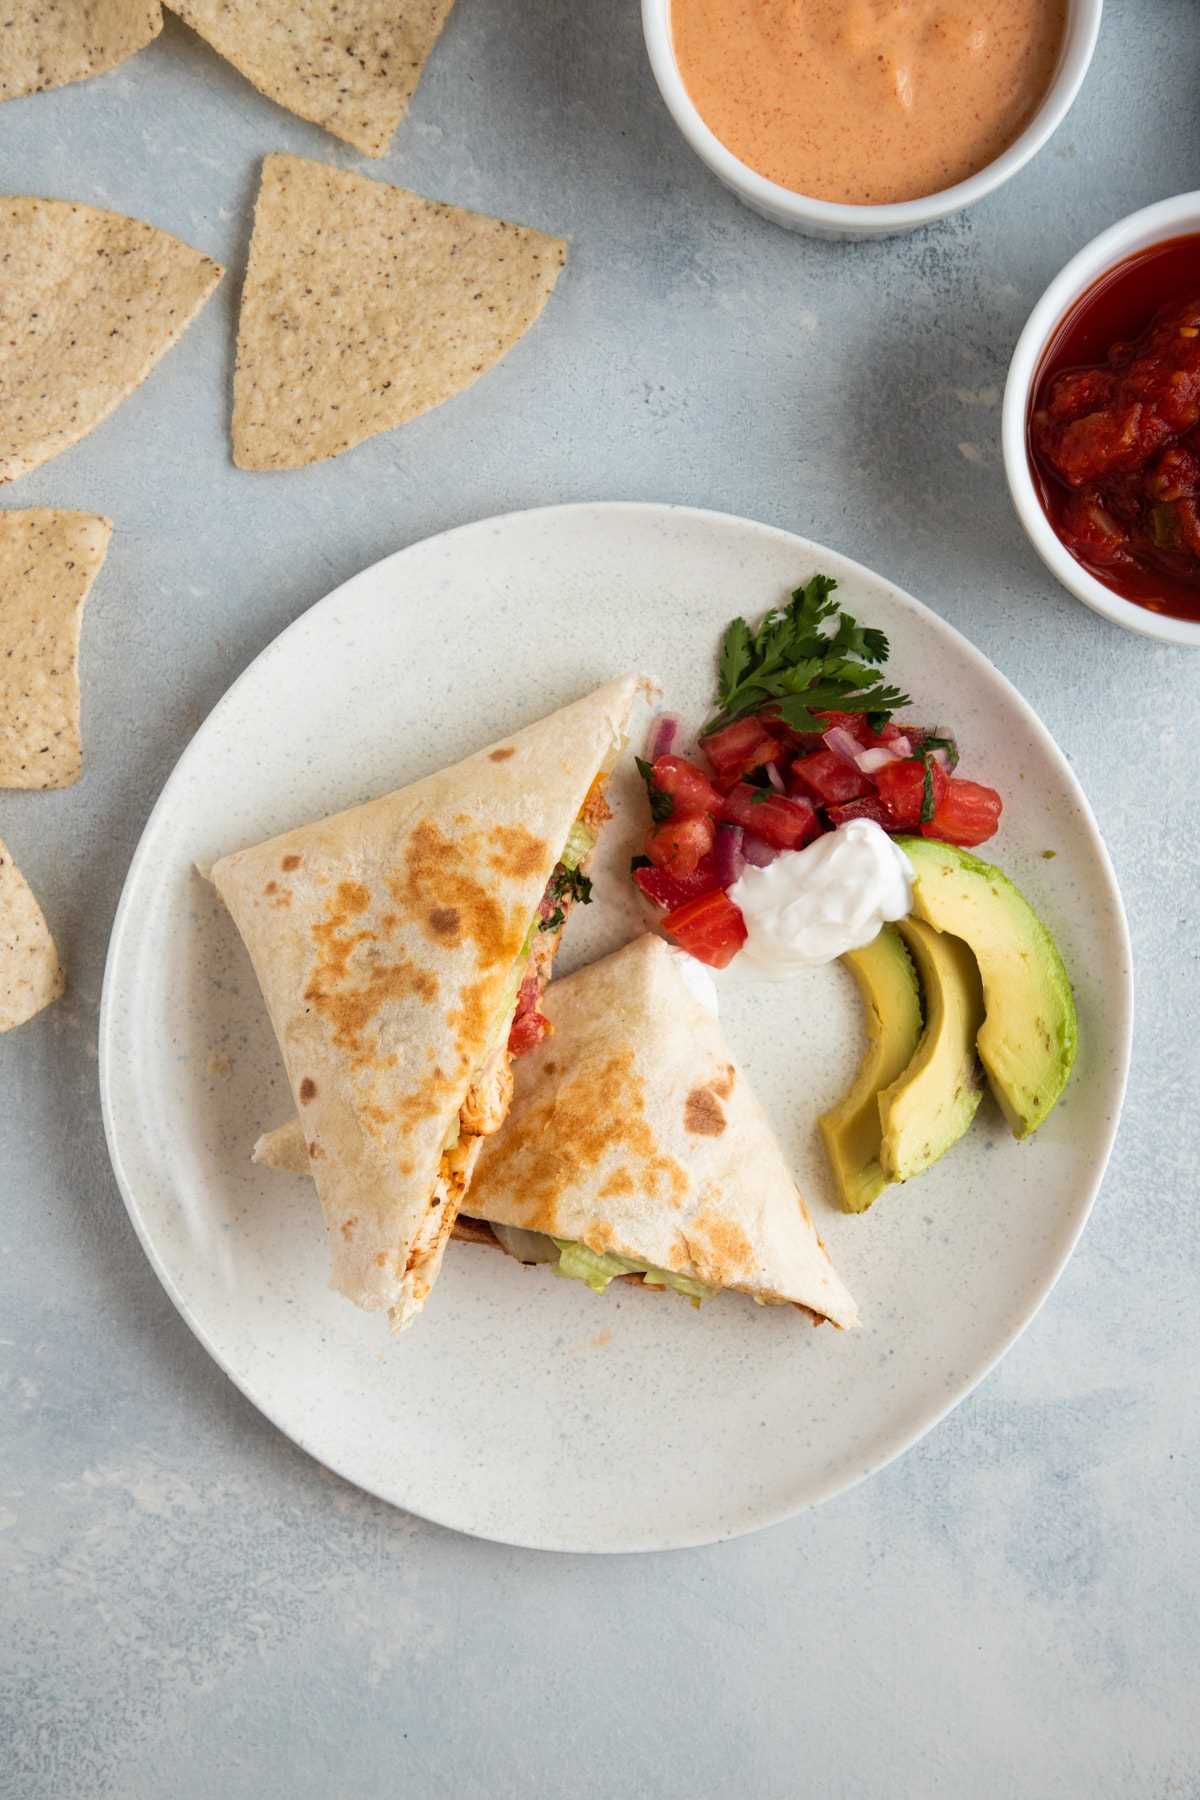 Chipotle Chicken Wrap served with pico de gallo, avocado and sour cream on the side